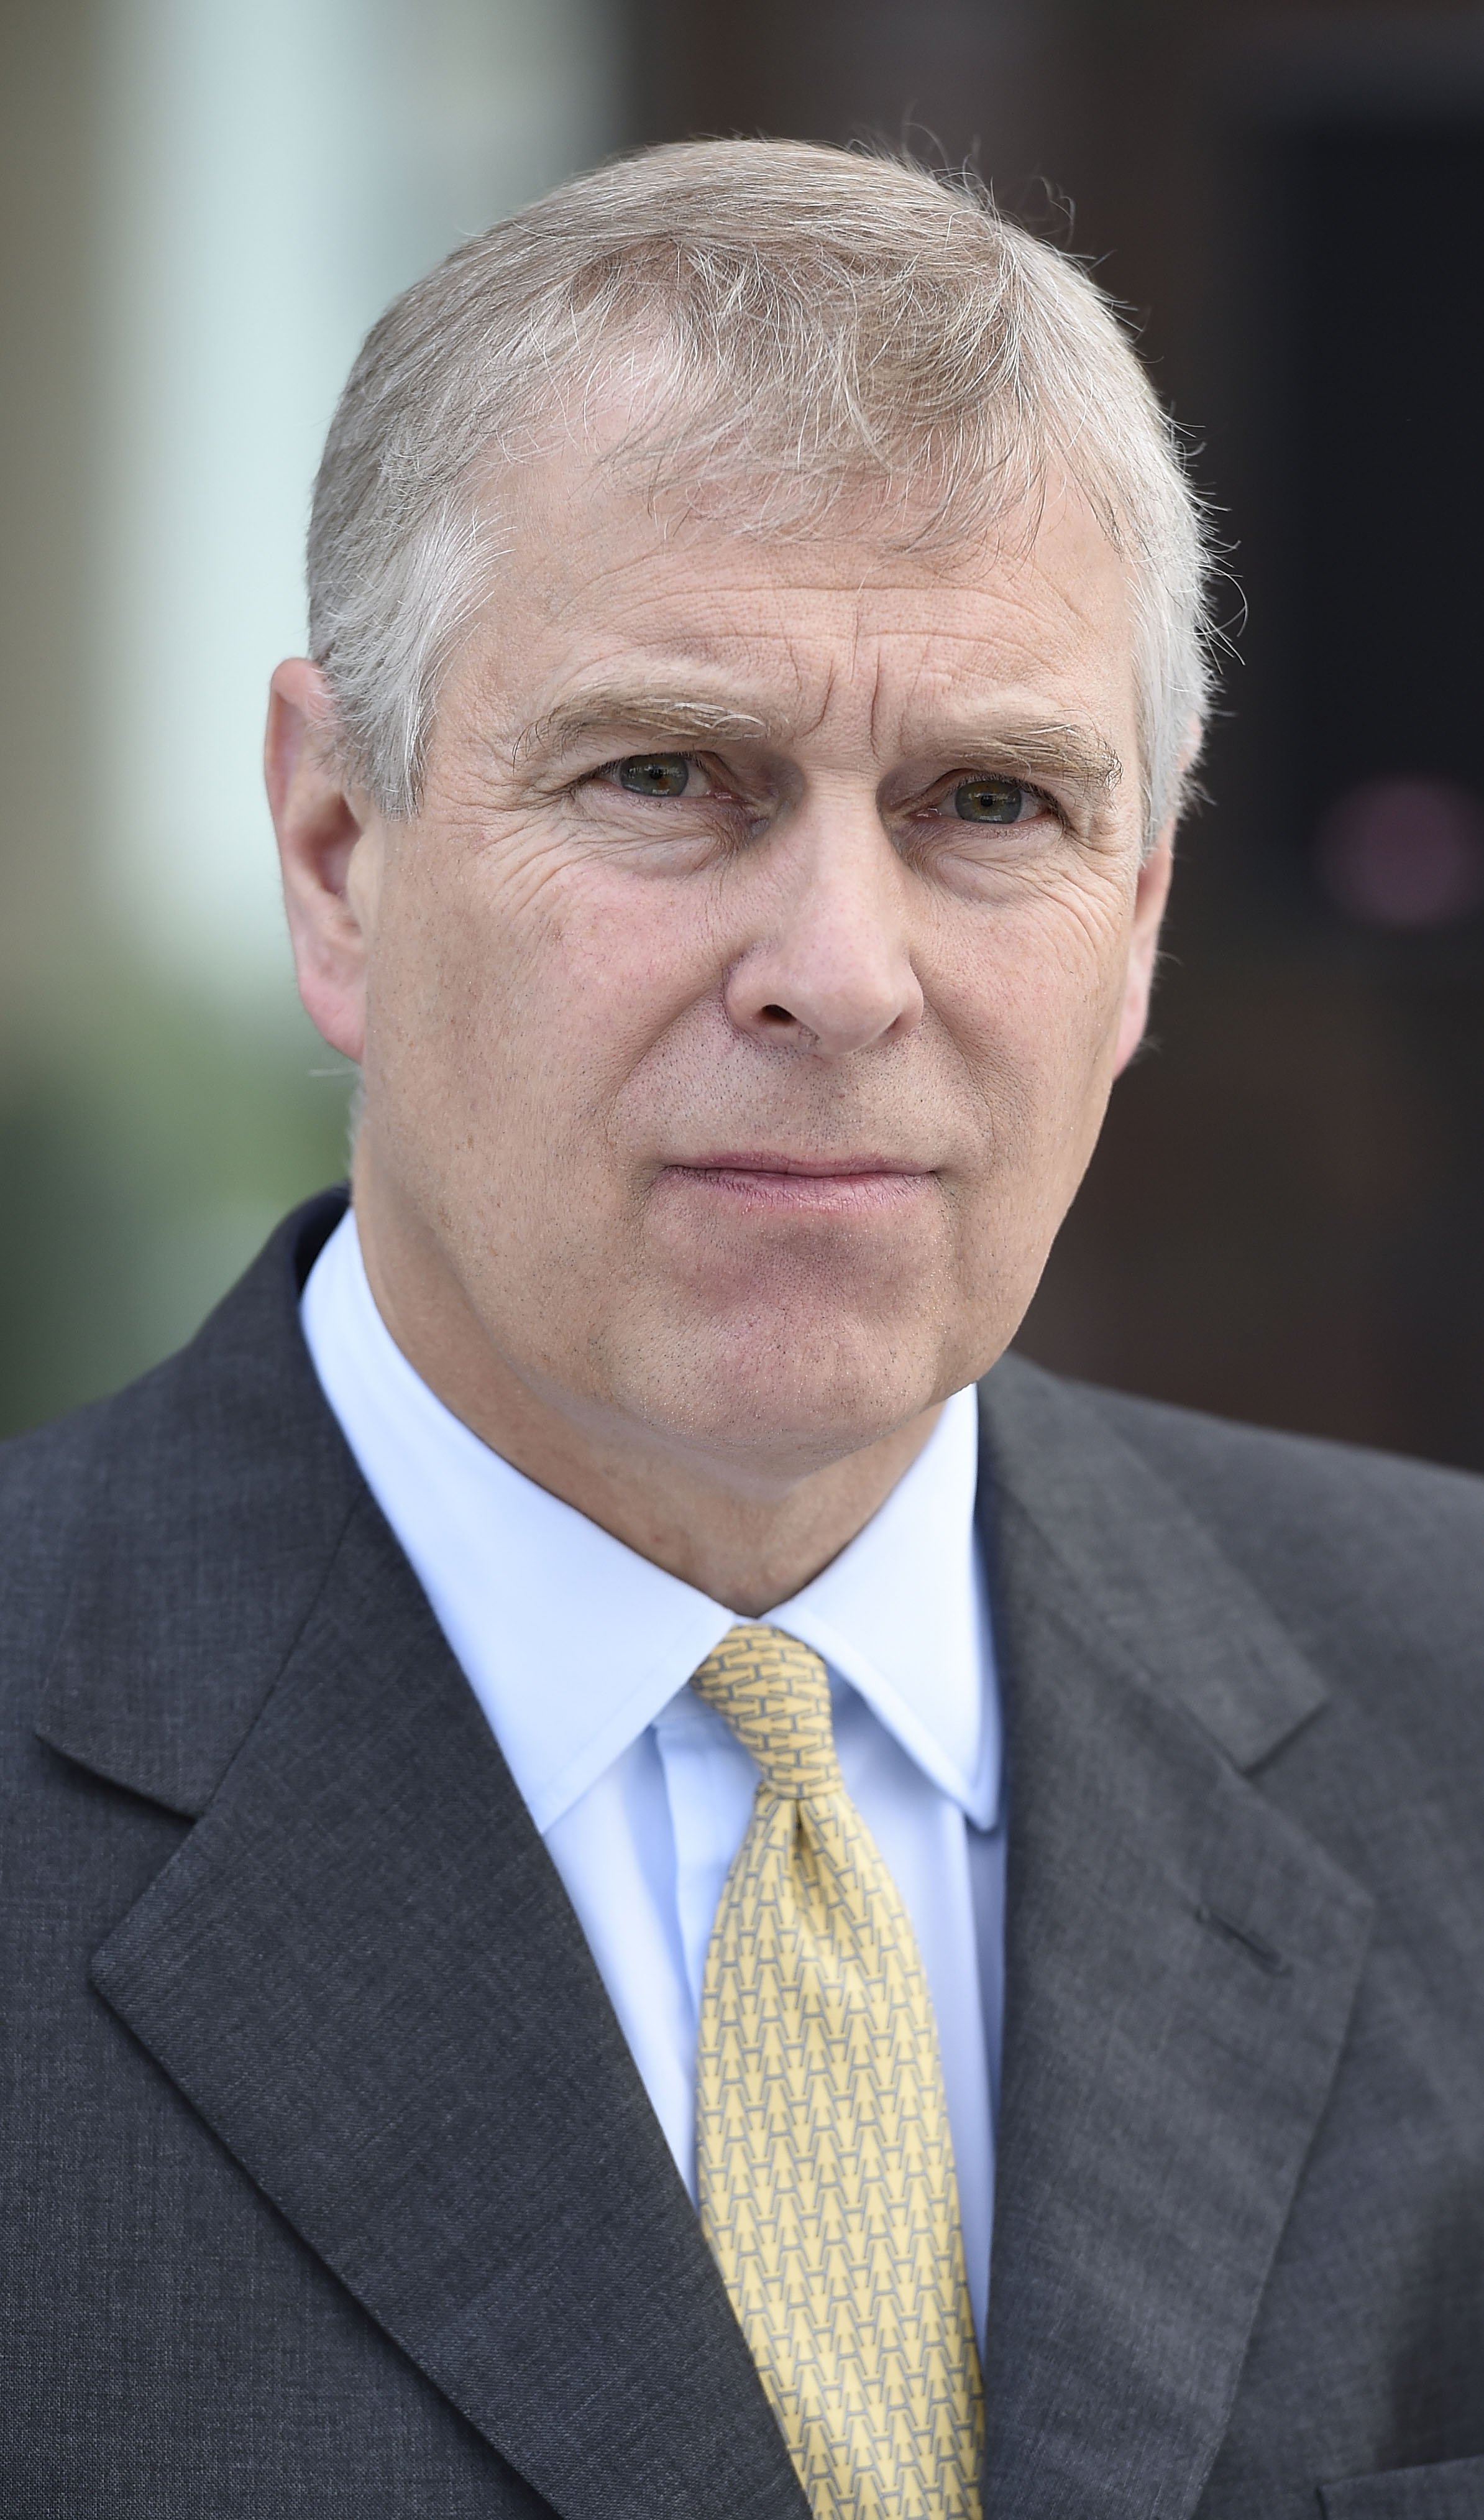 Prince Andrew, Duke of York during his visit to Volkswagen car plant on June 03, 2014 in Wolfsburg, Germany. / Source: Getty Images